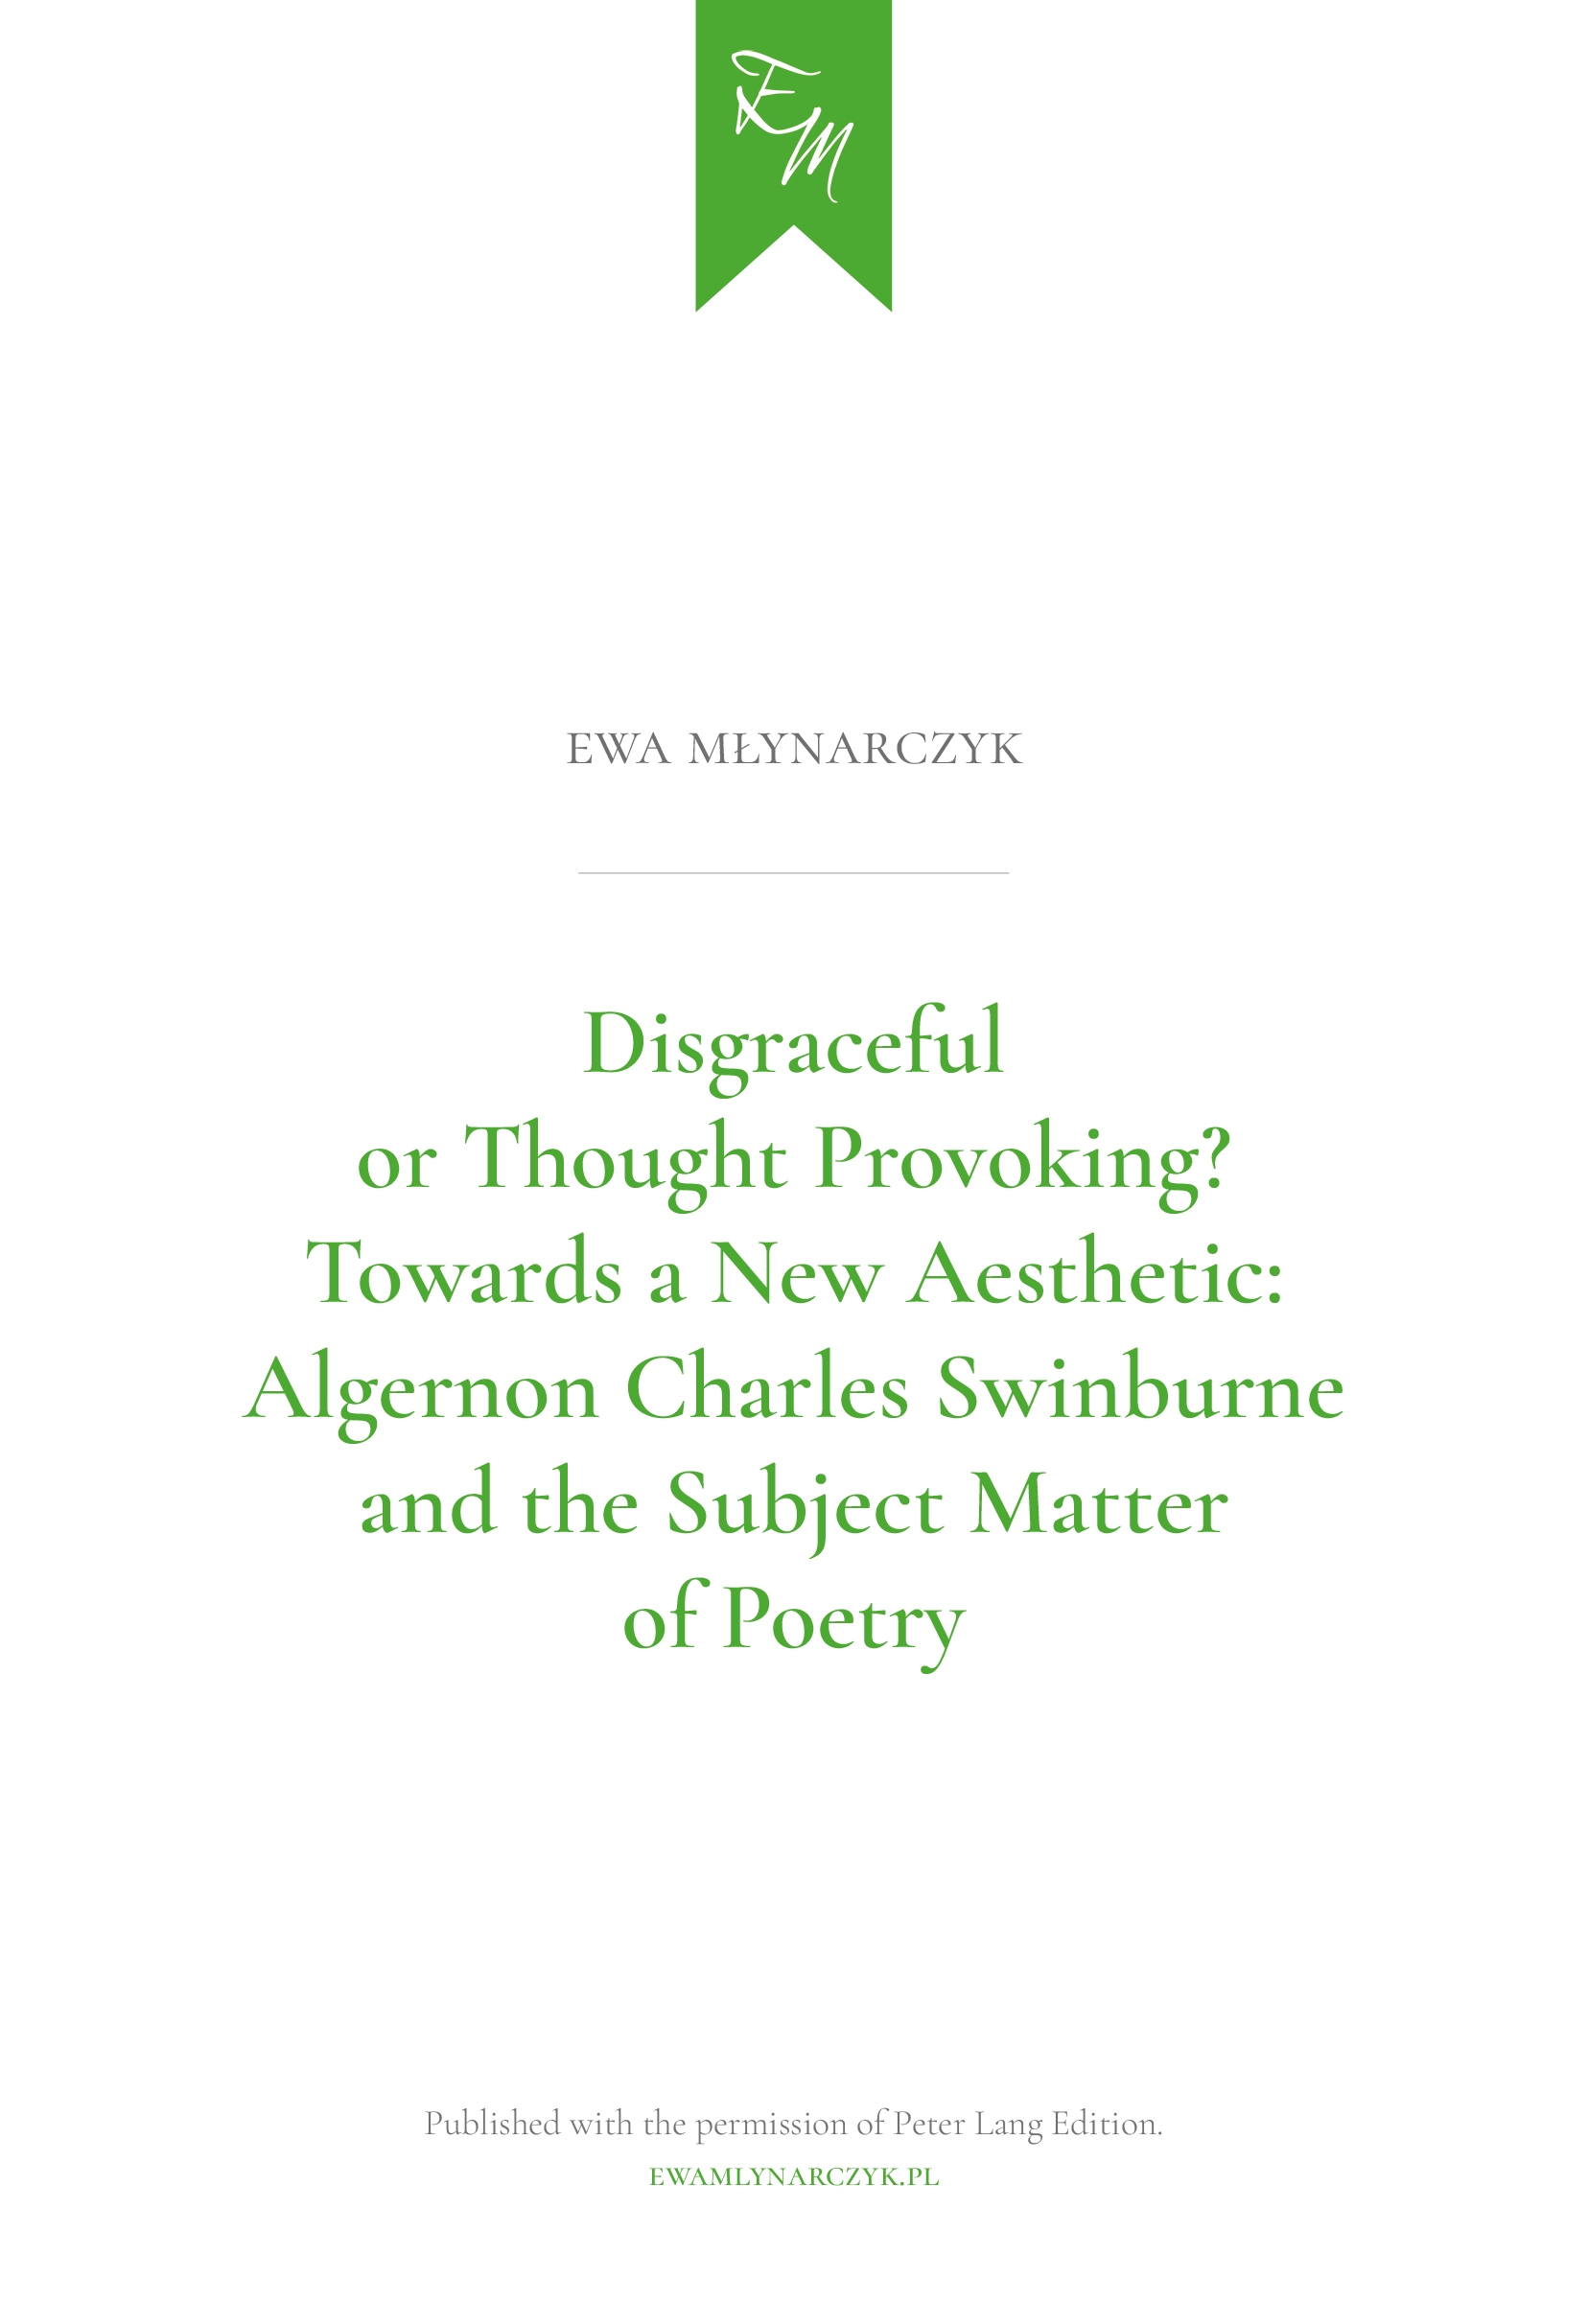 Articles by Ewa Młynarczyk / Artykuły Ewy Młynarczyk: Disgraceful or thought provoking? Towards a new aesthetic: Algernon Charles Swinburne and the subject matter of poetry